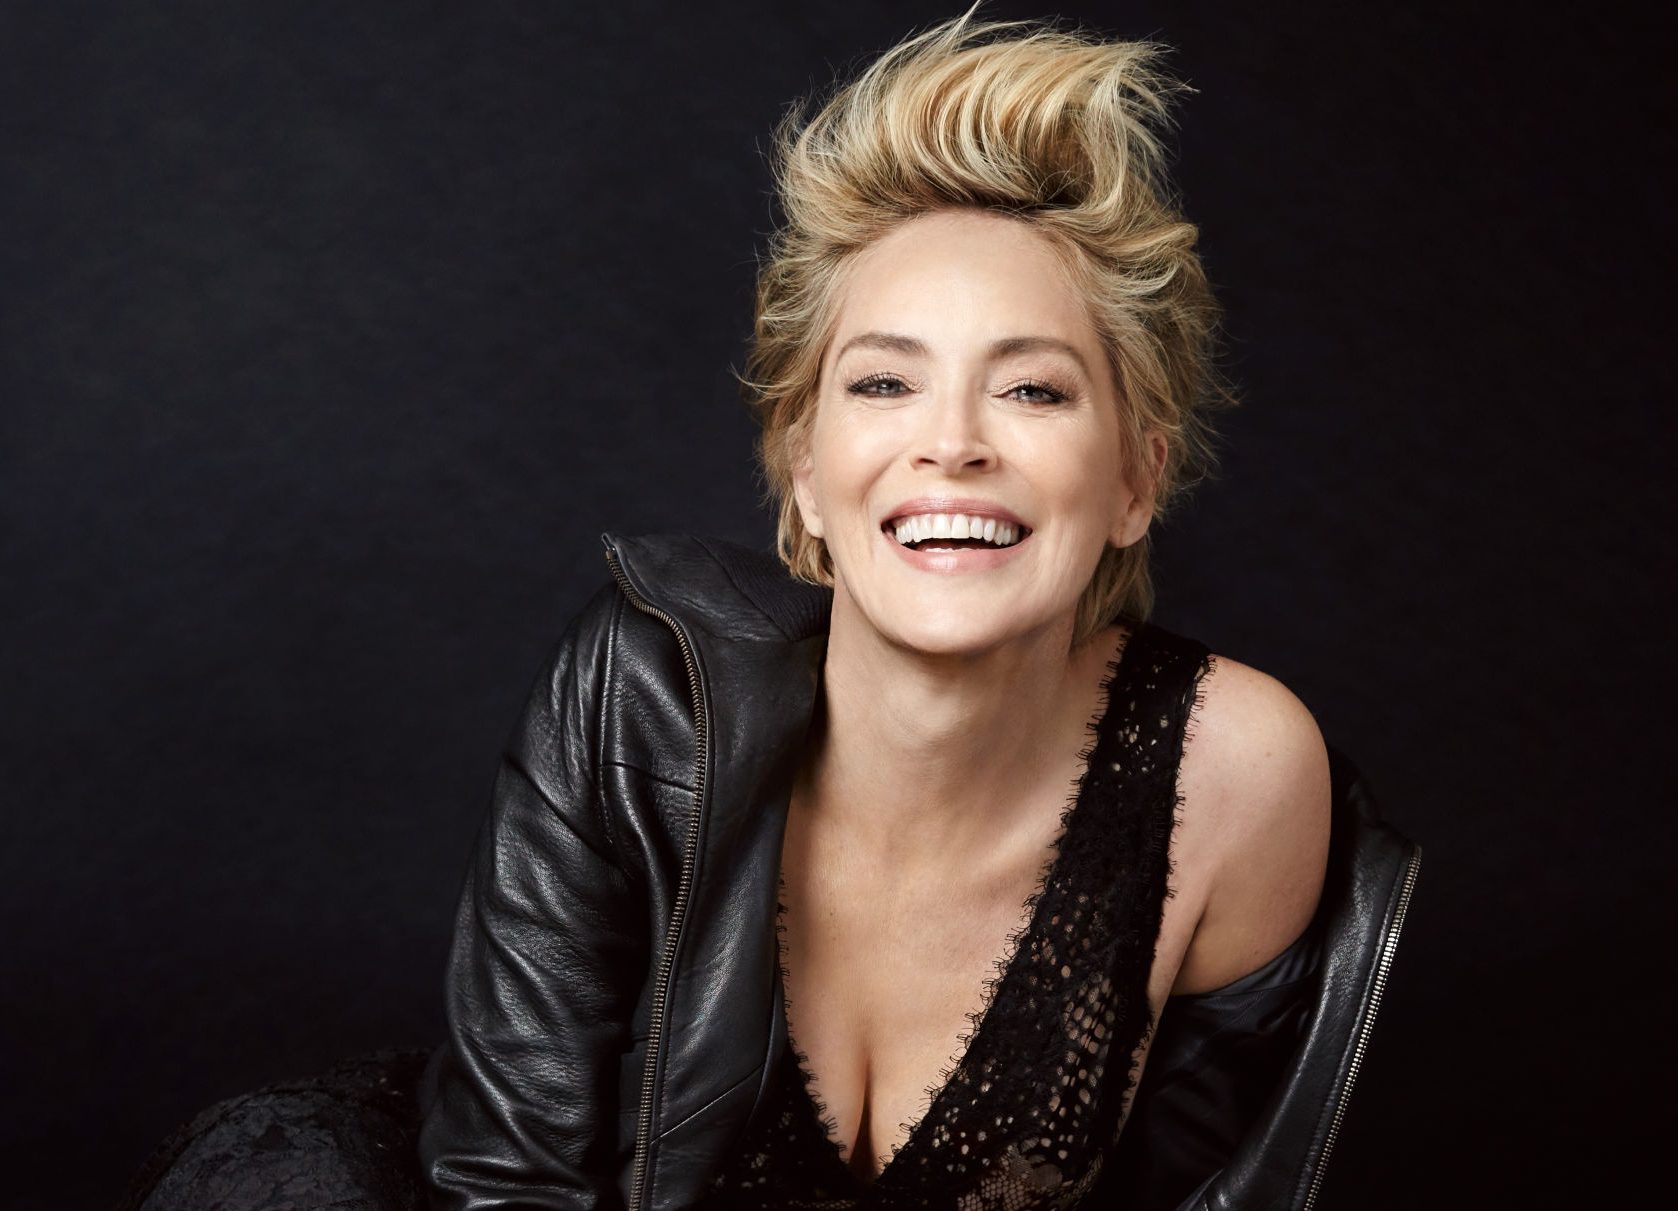 Sharon Stone photographed for the Hollywood Reporter in London, England. (Photo by Lorenzo Agius/Contour by Getty Images)